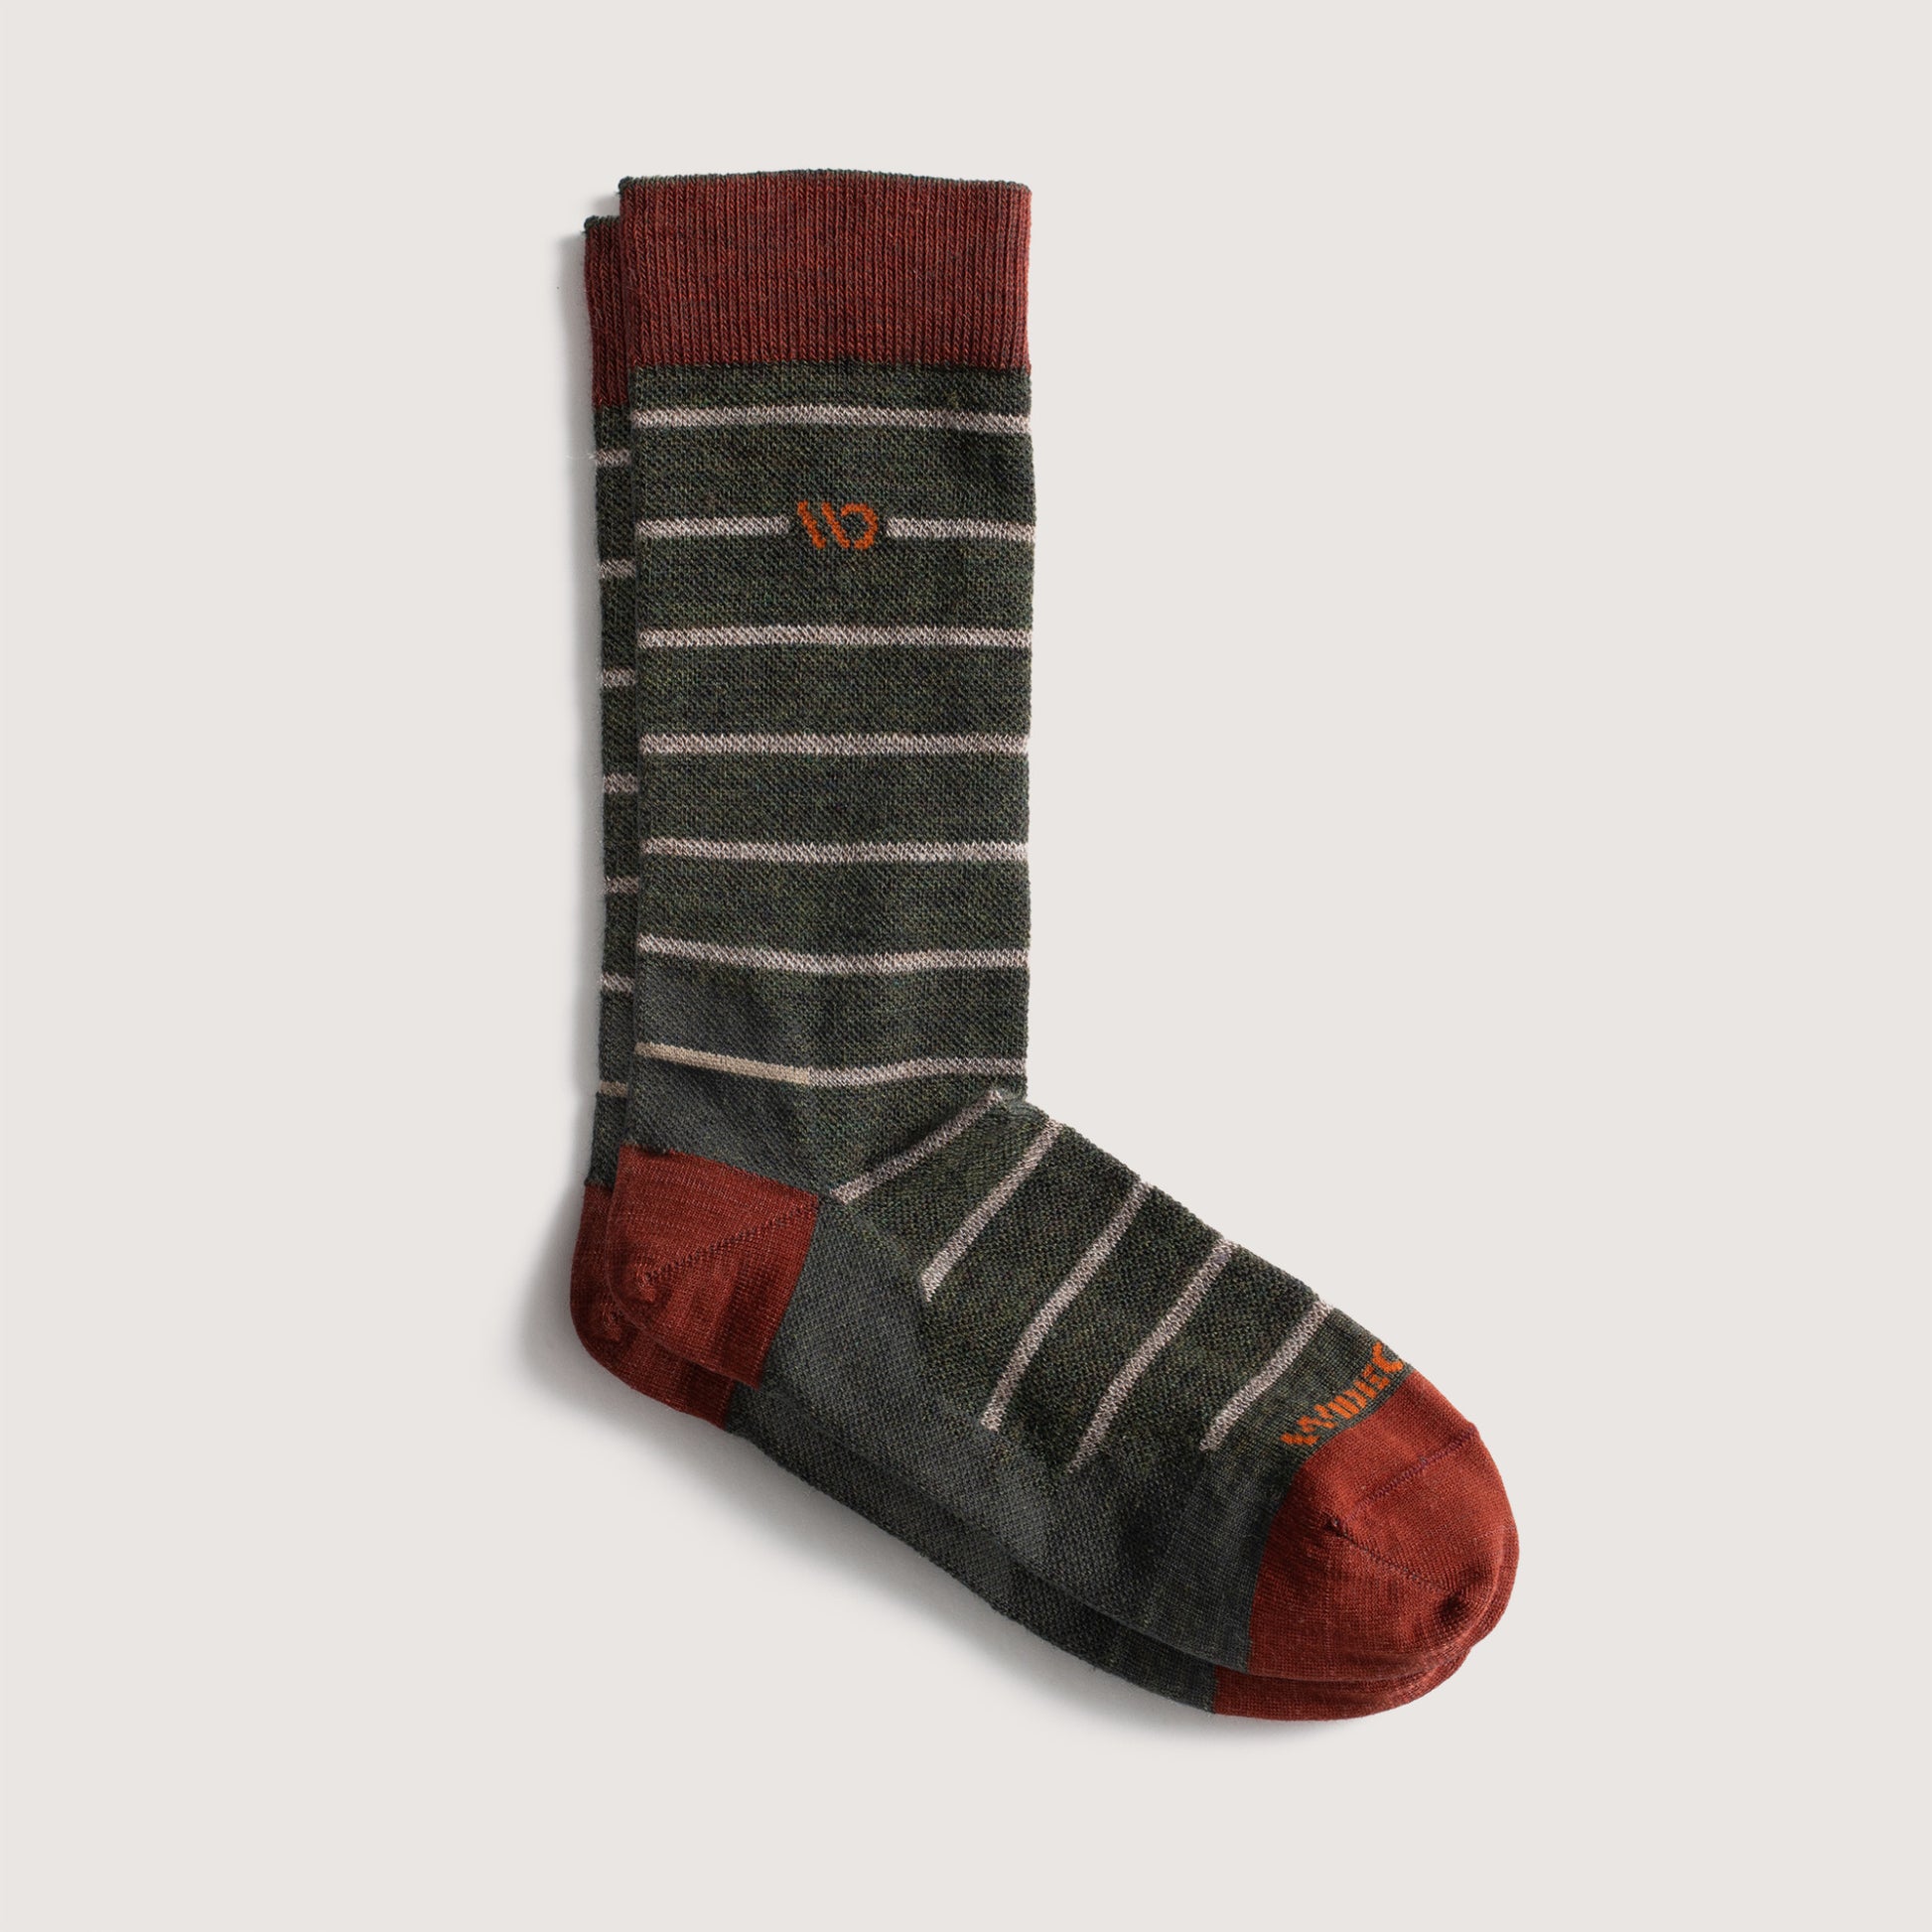 Flat socks, featuring orange heel/toe, logo, forest green body and gray stripes --Forest